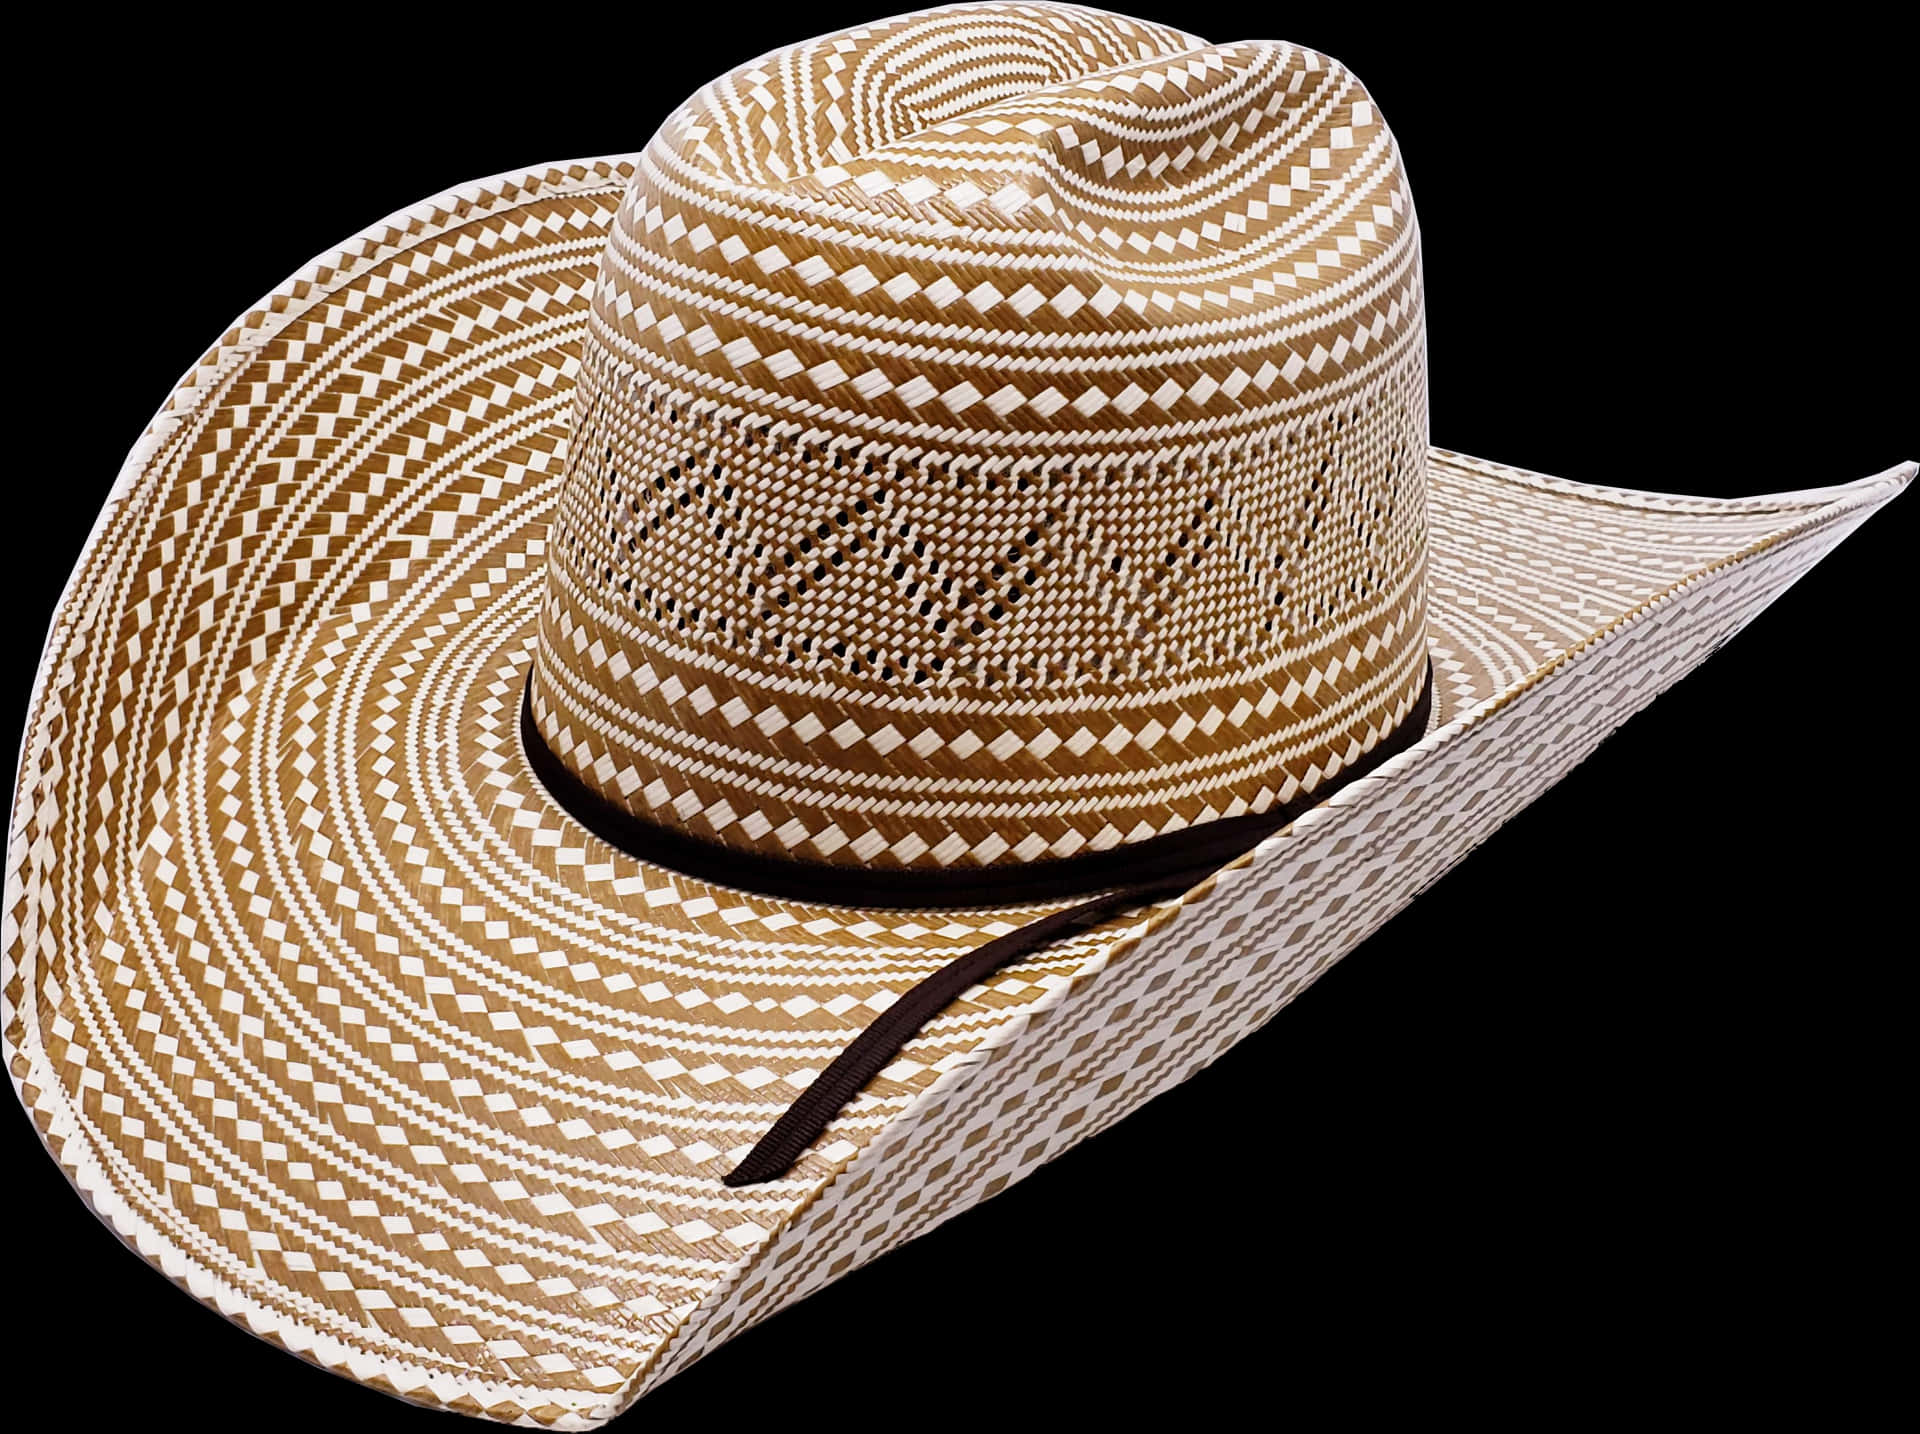 Woven Straw Cowboy Hat PNG image